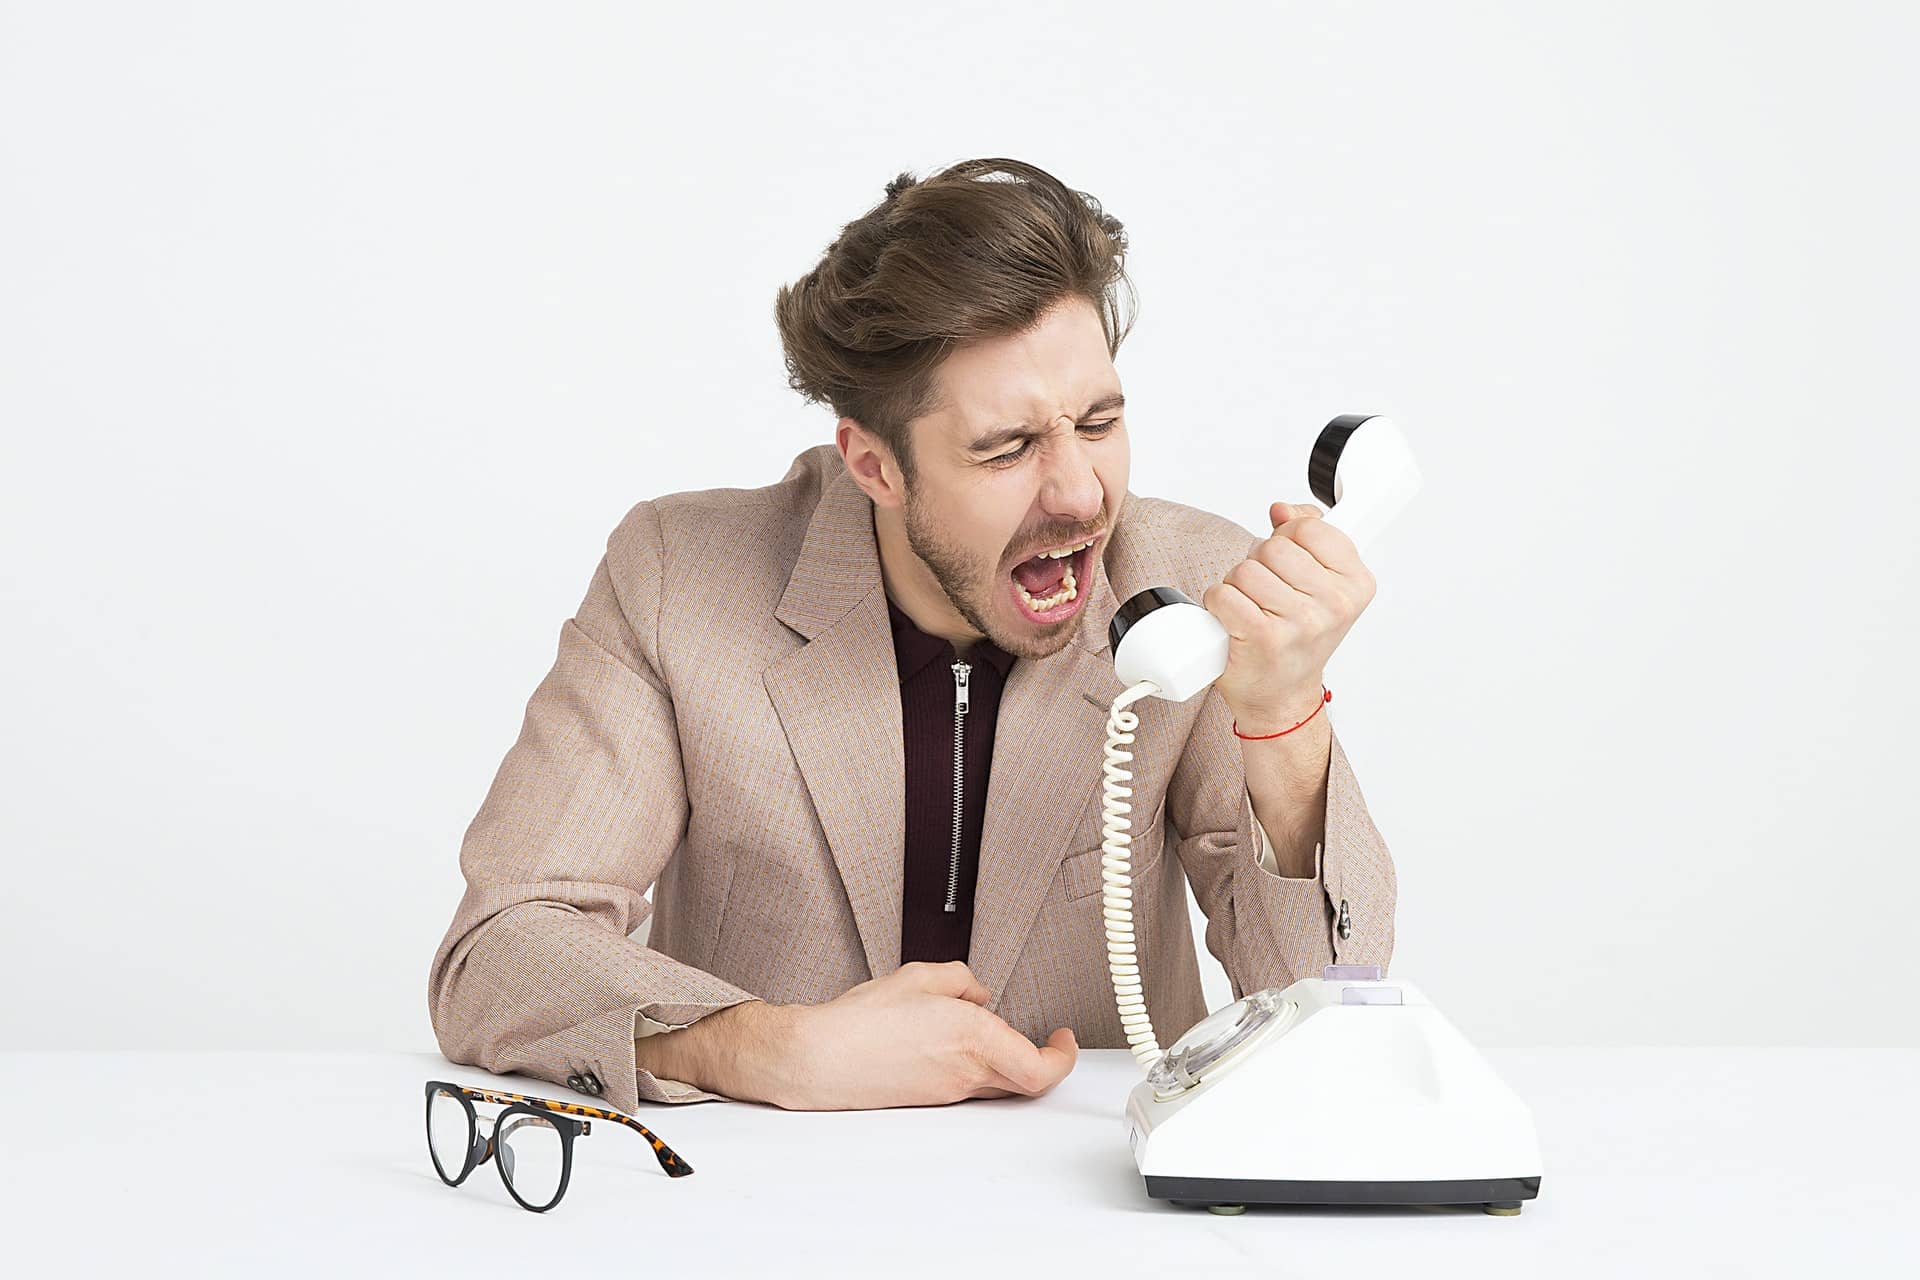 A man yelling into a phone representing workplace harassment and violence